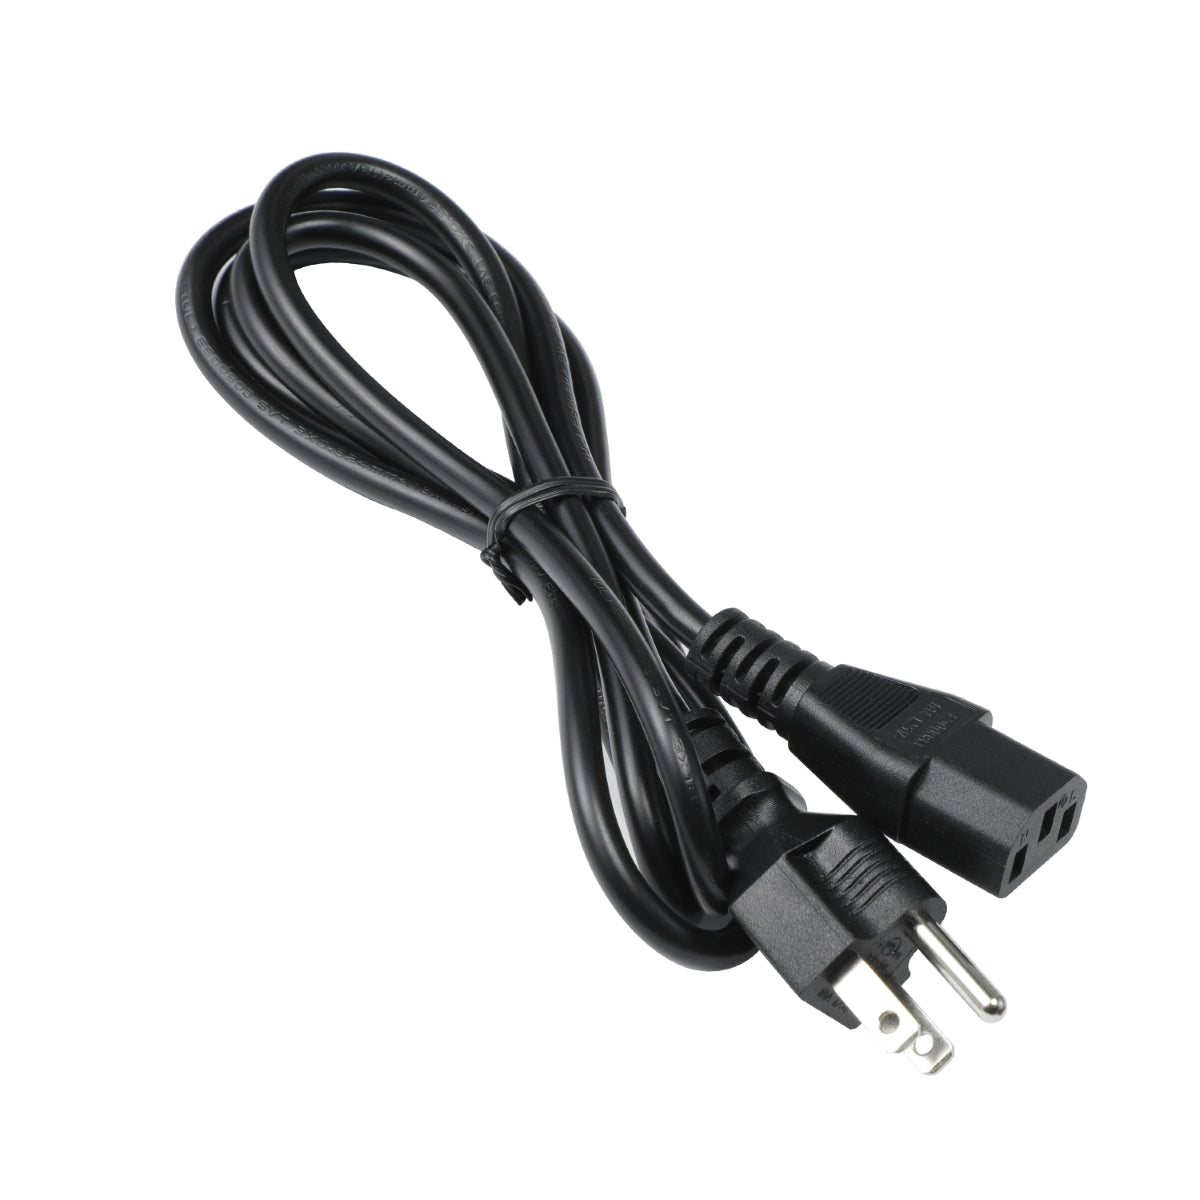 Power Cord for HP Pavilion Power 580-068 Computer.